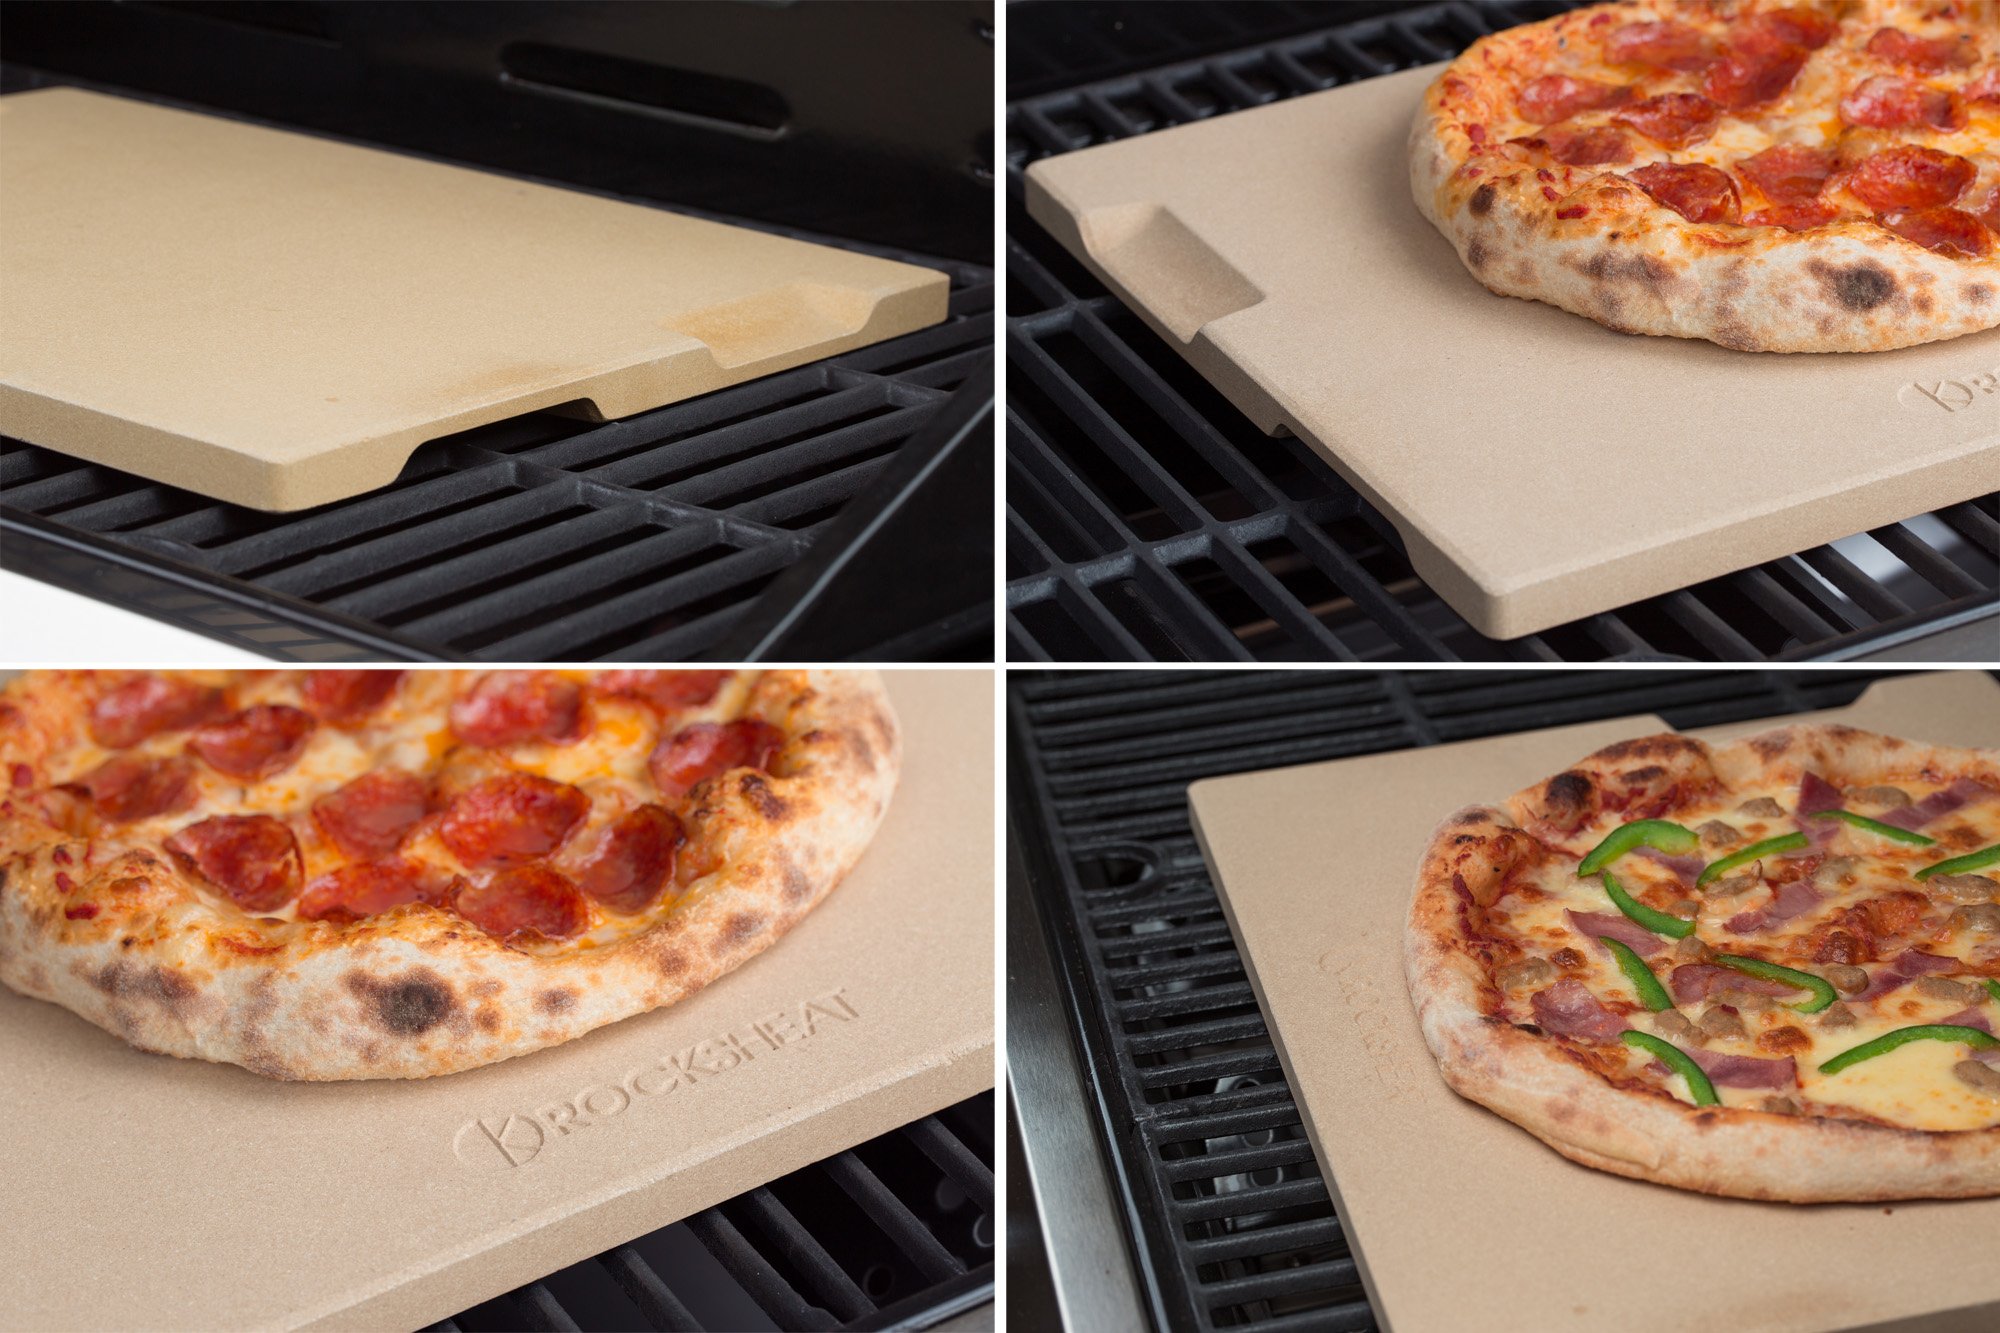 ROCKSHEAT Pizza Stone 12in x 15in Rectangular Baking & Grilling Stone, Perfect for Oven, BBQ and Grill. Innovative Double - faced Built - in 4 Handles Design